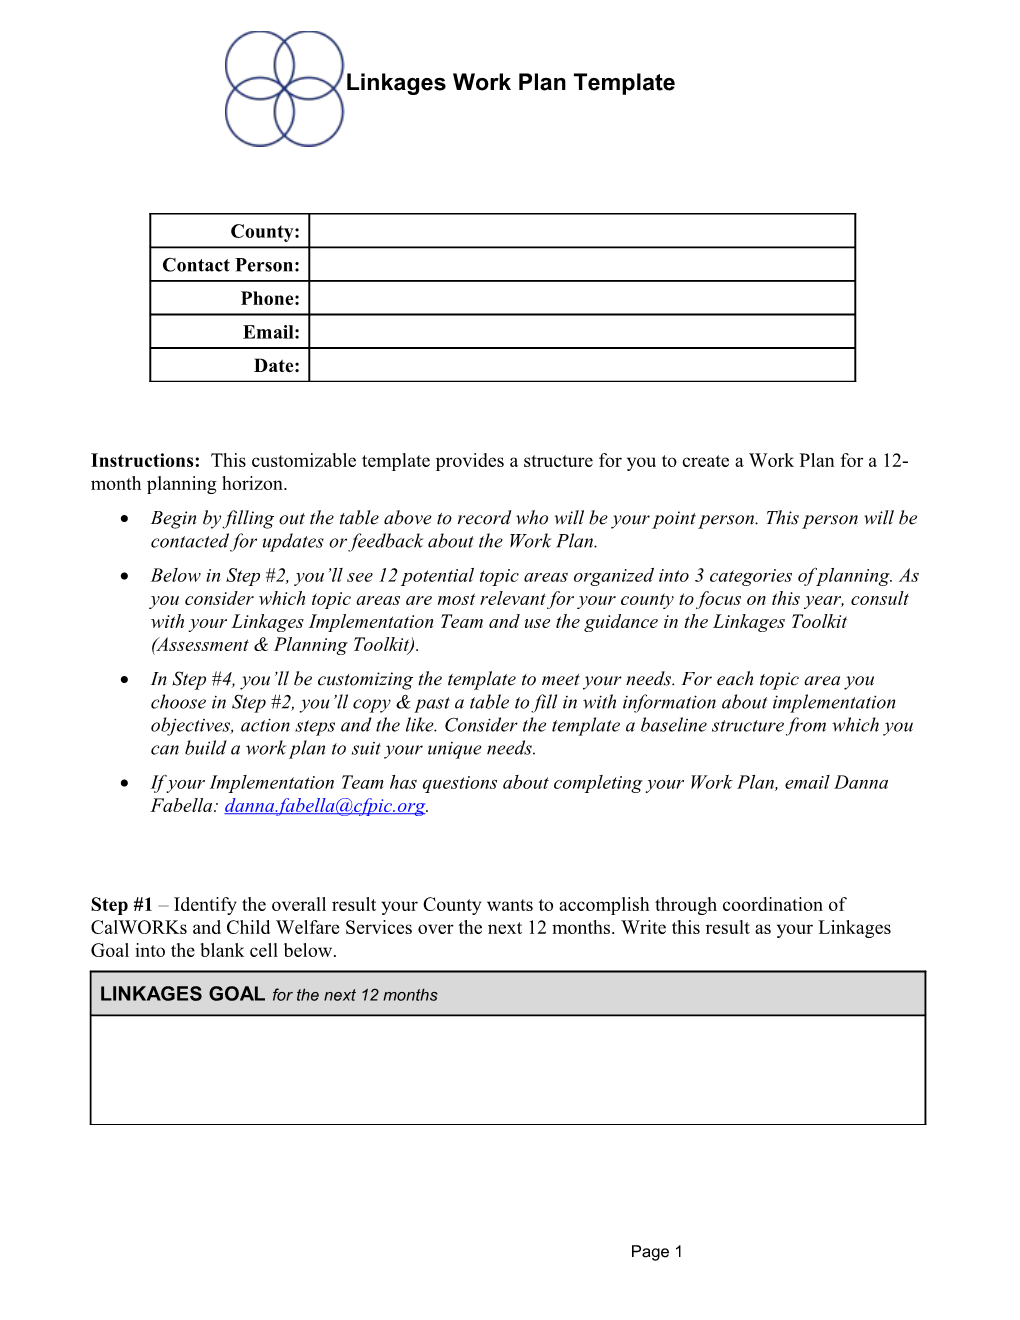 Linkages Work Plan Template